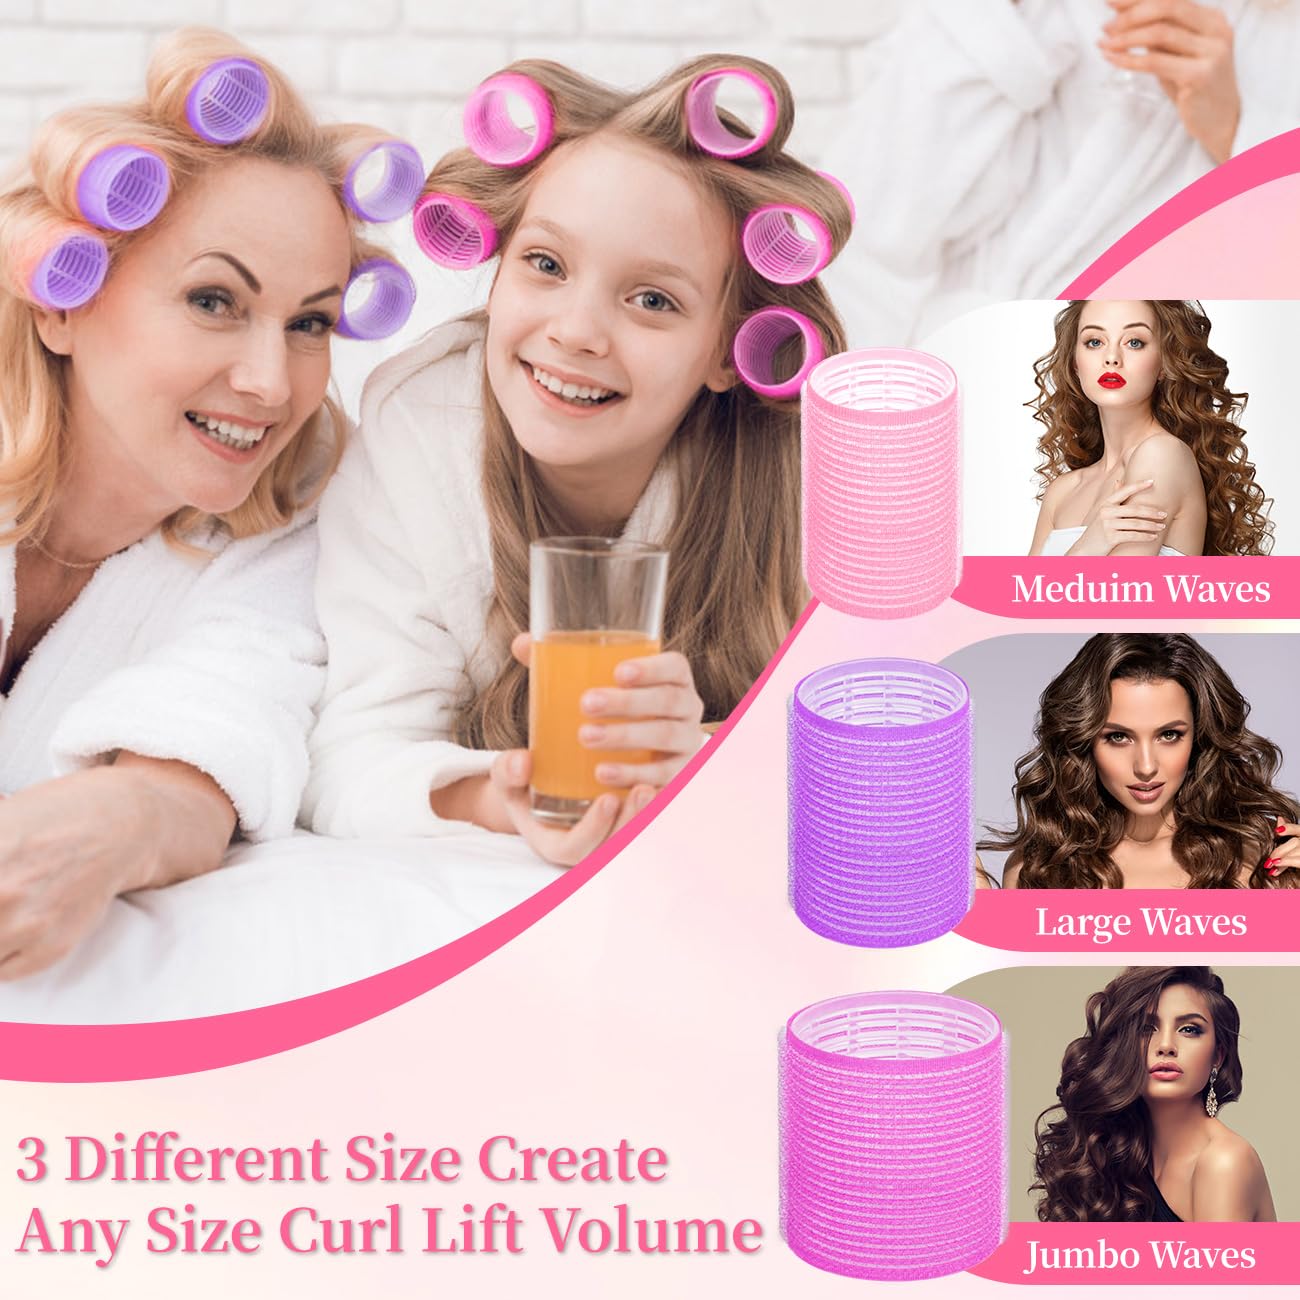 29 PCS Hair Roller Set Hair Curlers, Rollers for Hair Blowout Look with Stainless steel Clips Jumbo Large Medium Hair Curlers for Short Long Hair